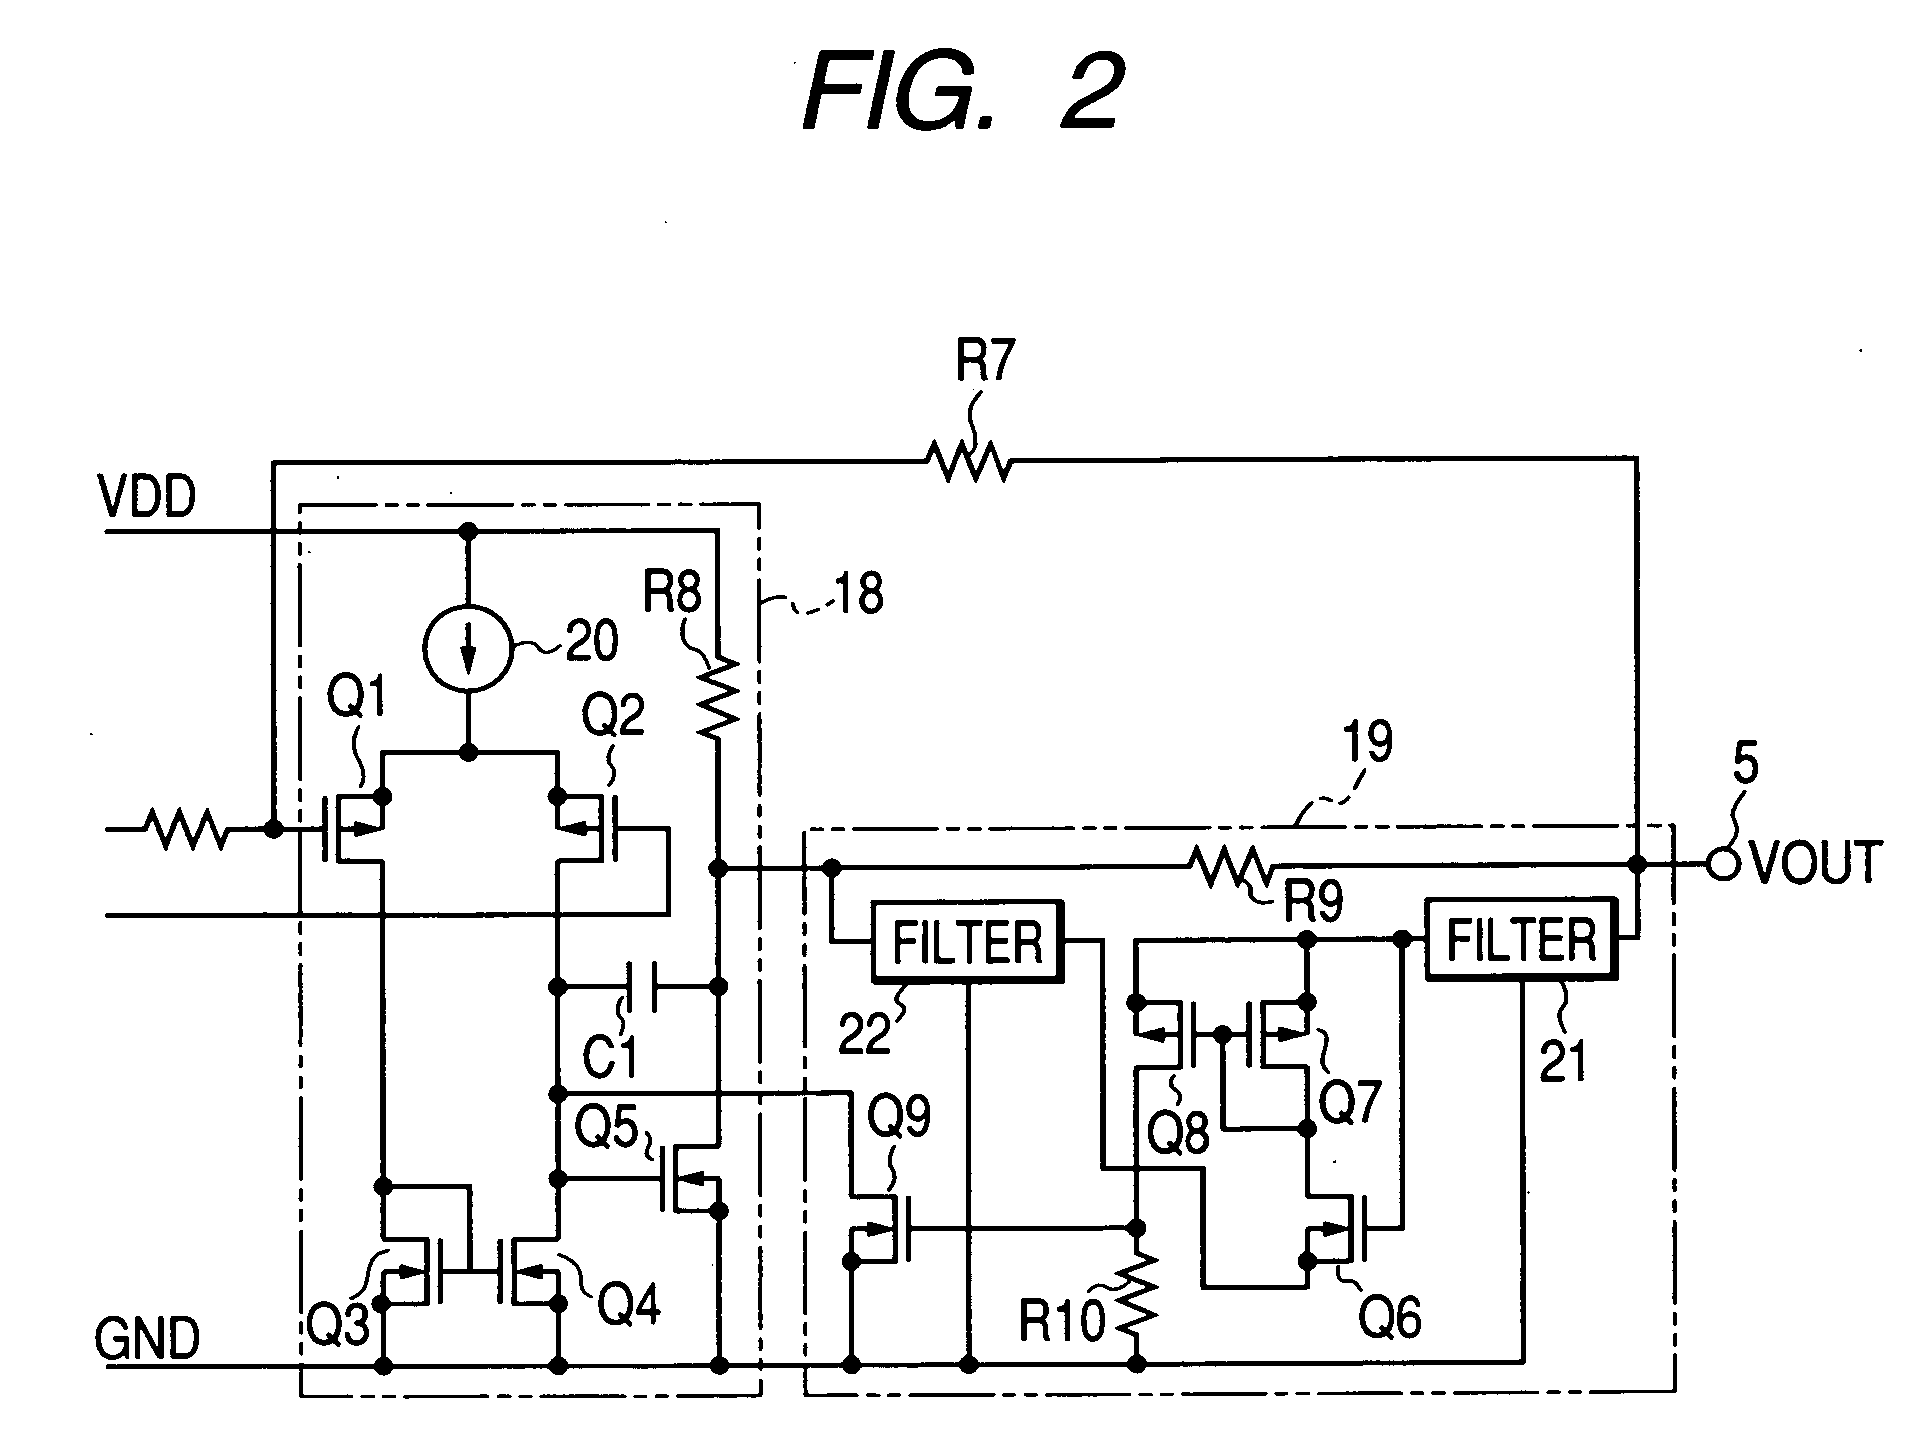 Physical quantity sensor with trimming function